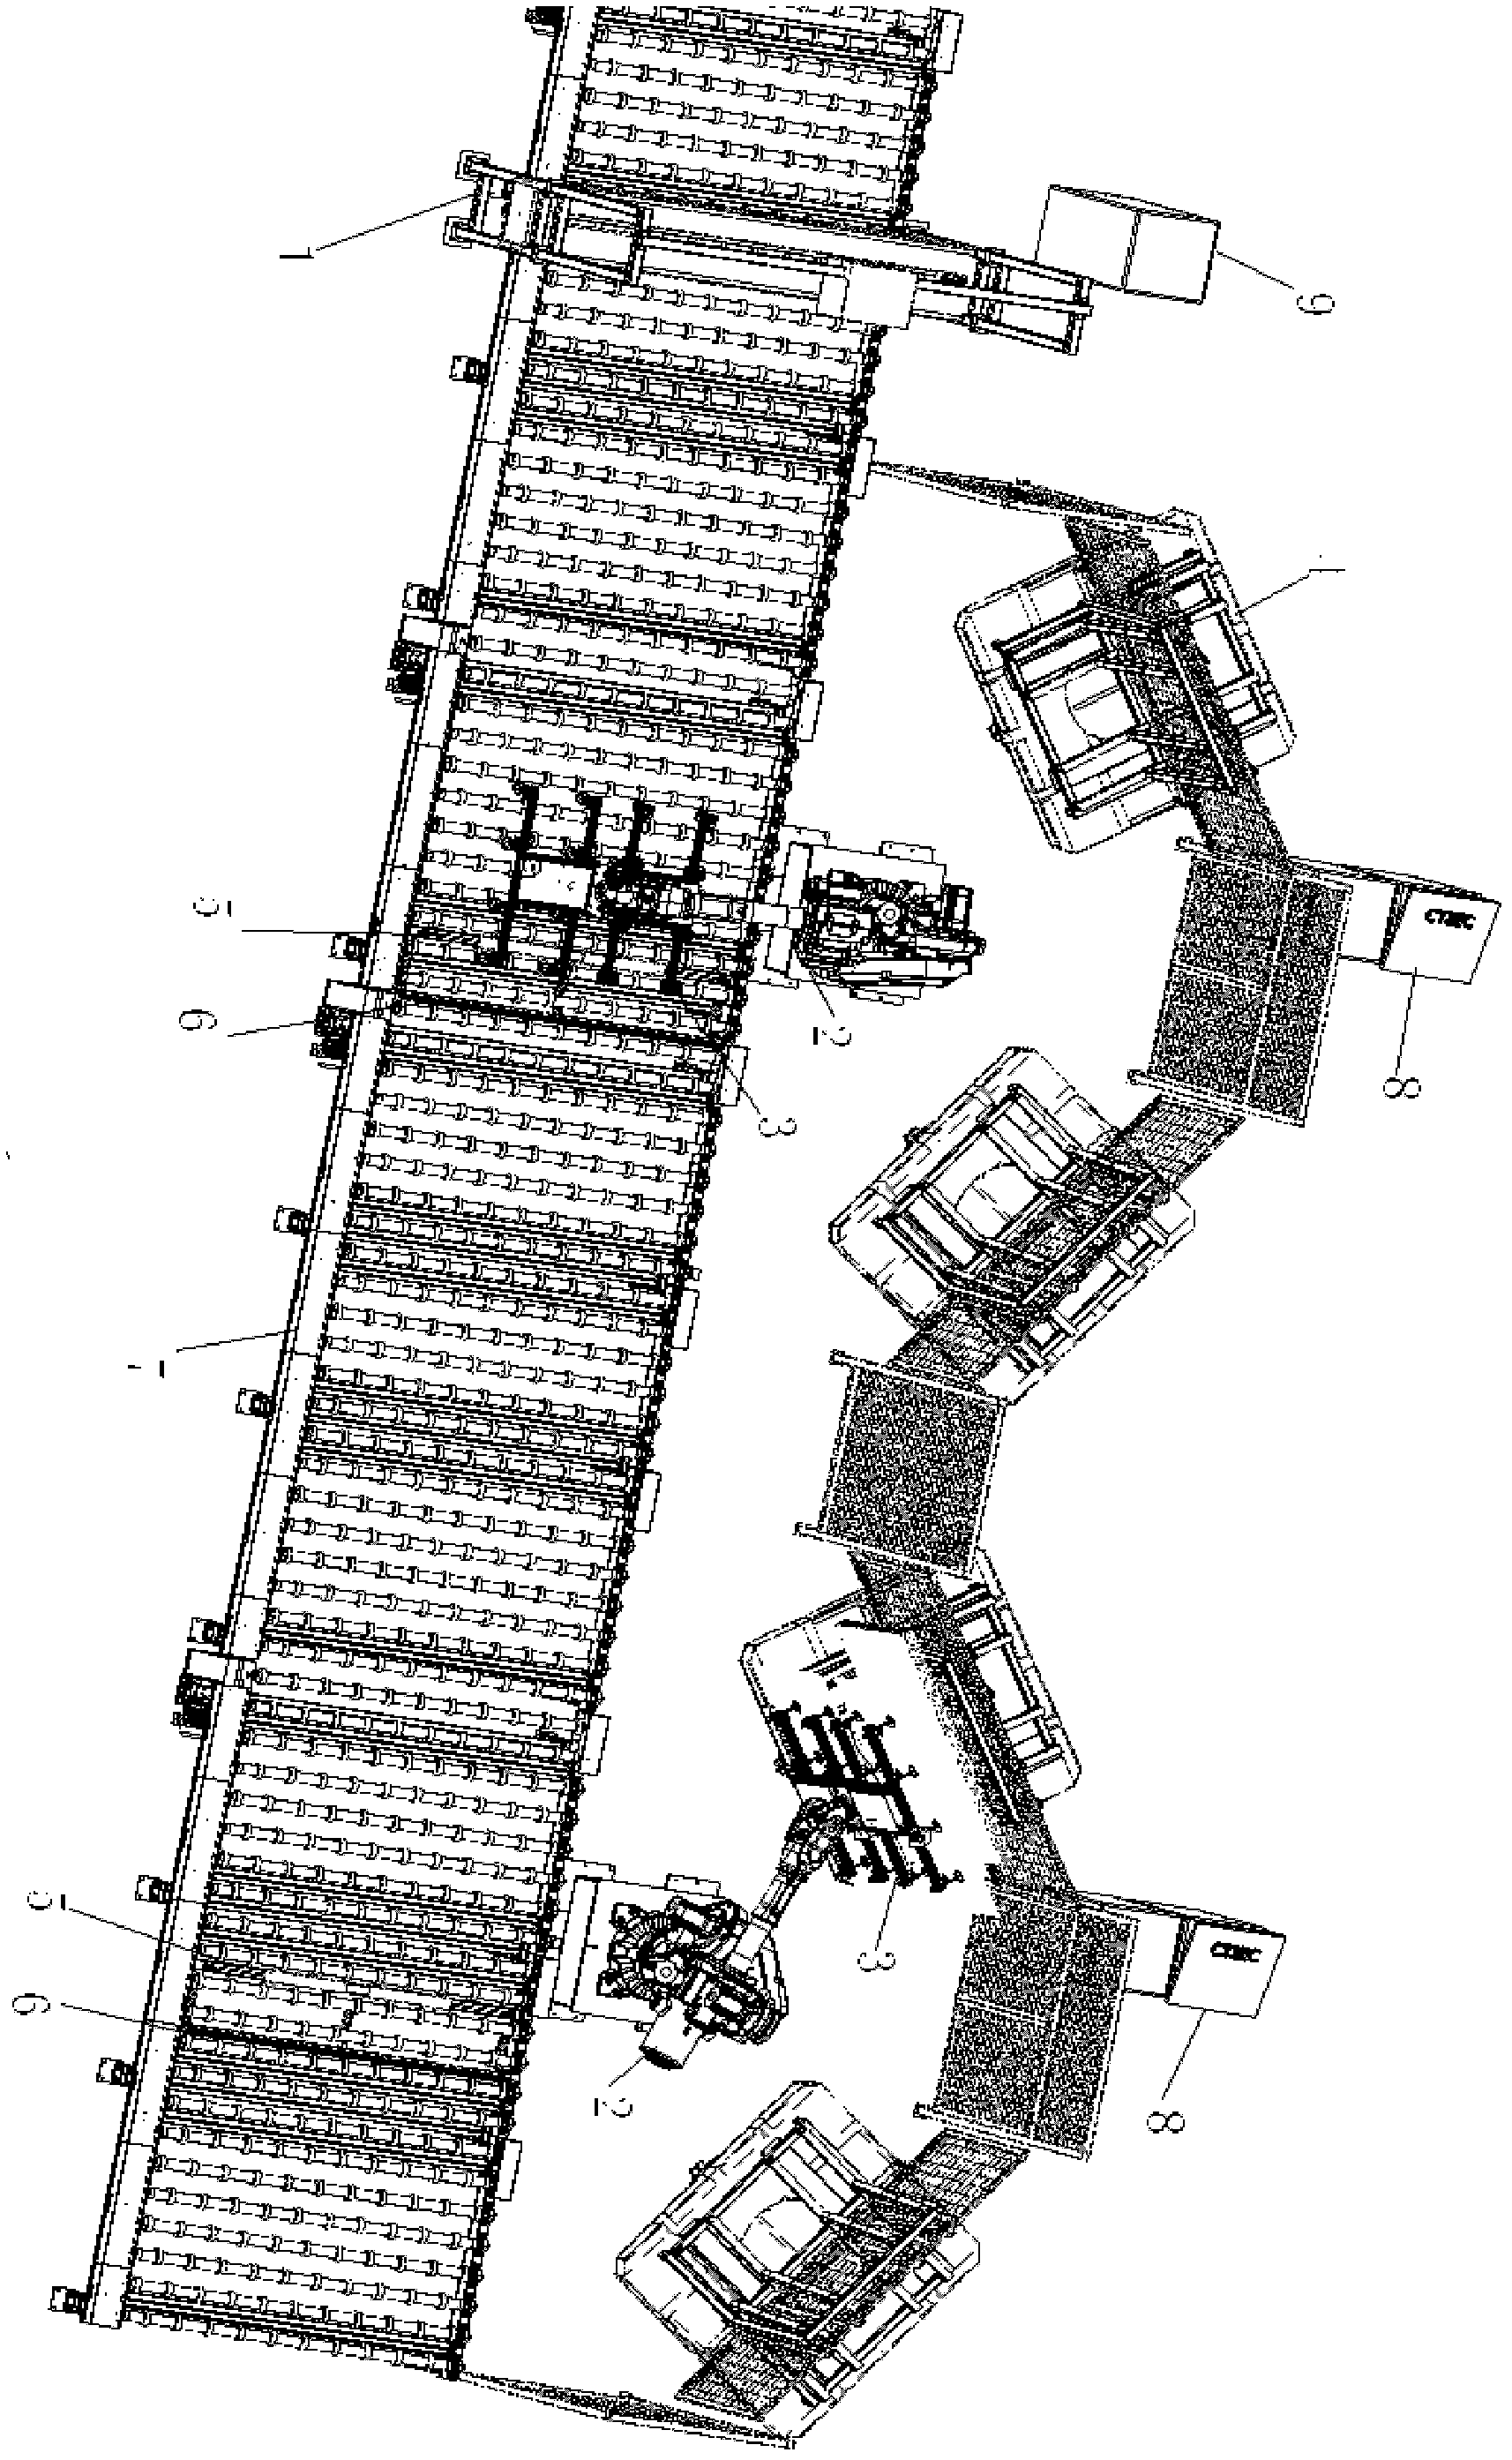 Method of manipulator stacking system for glass